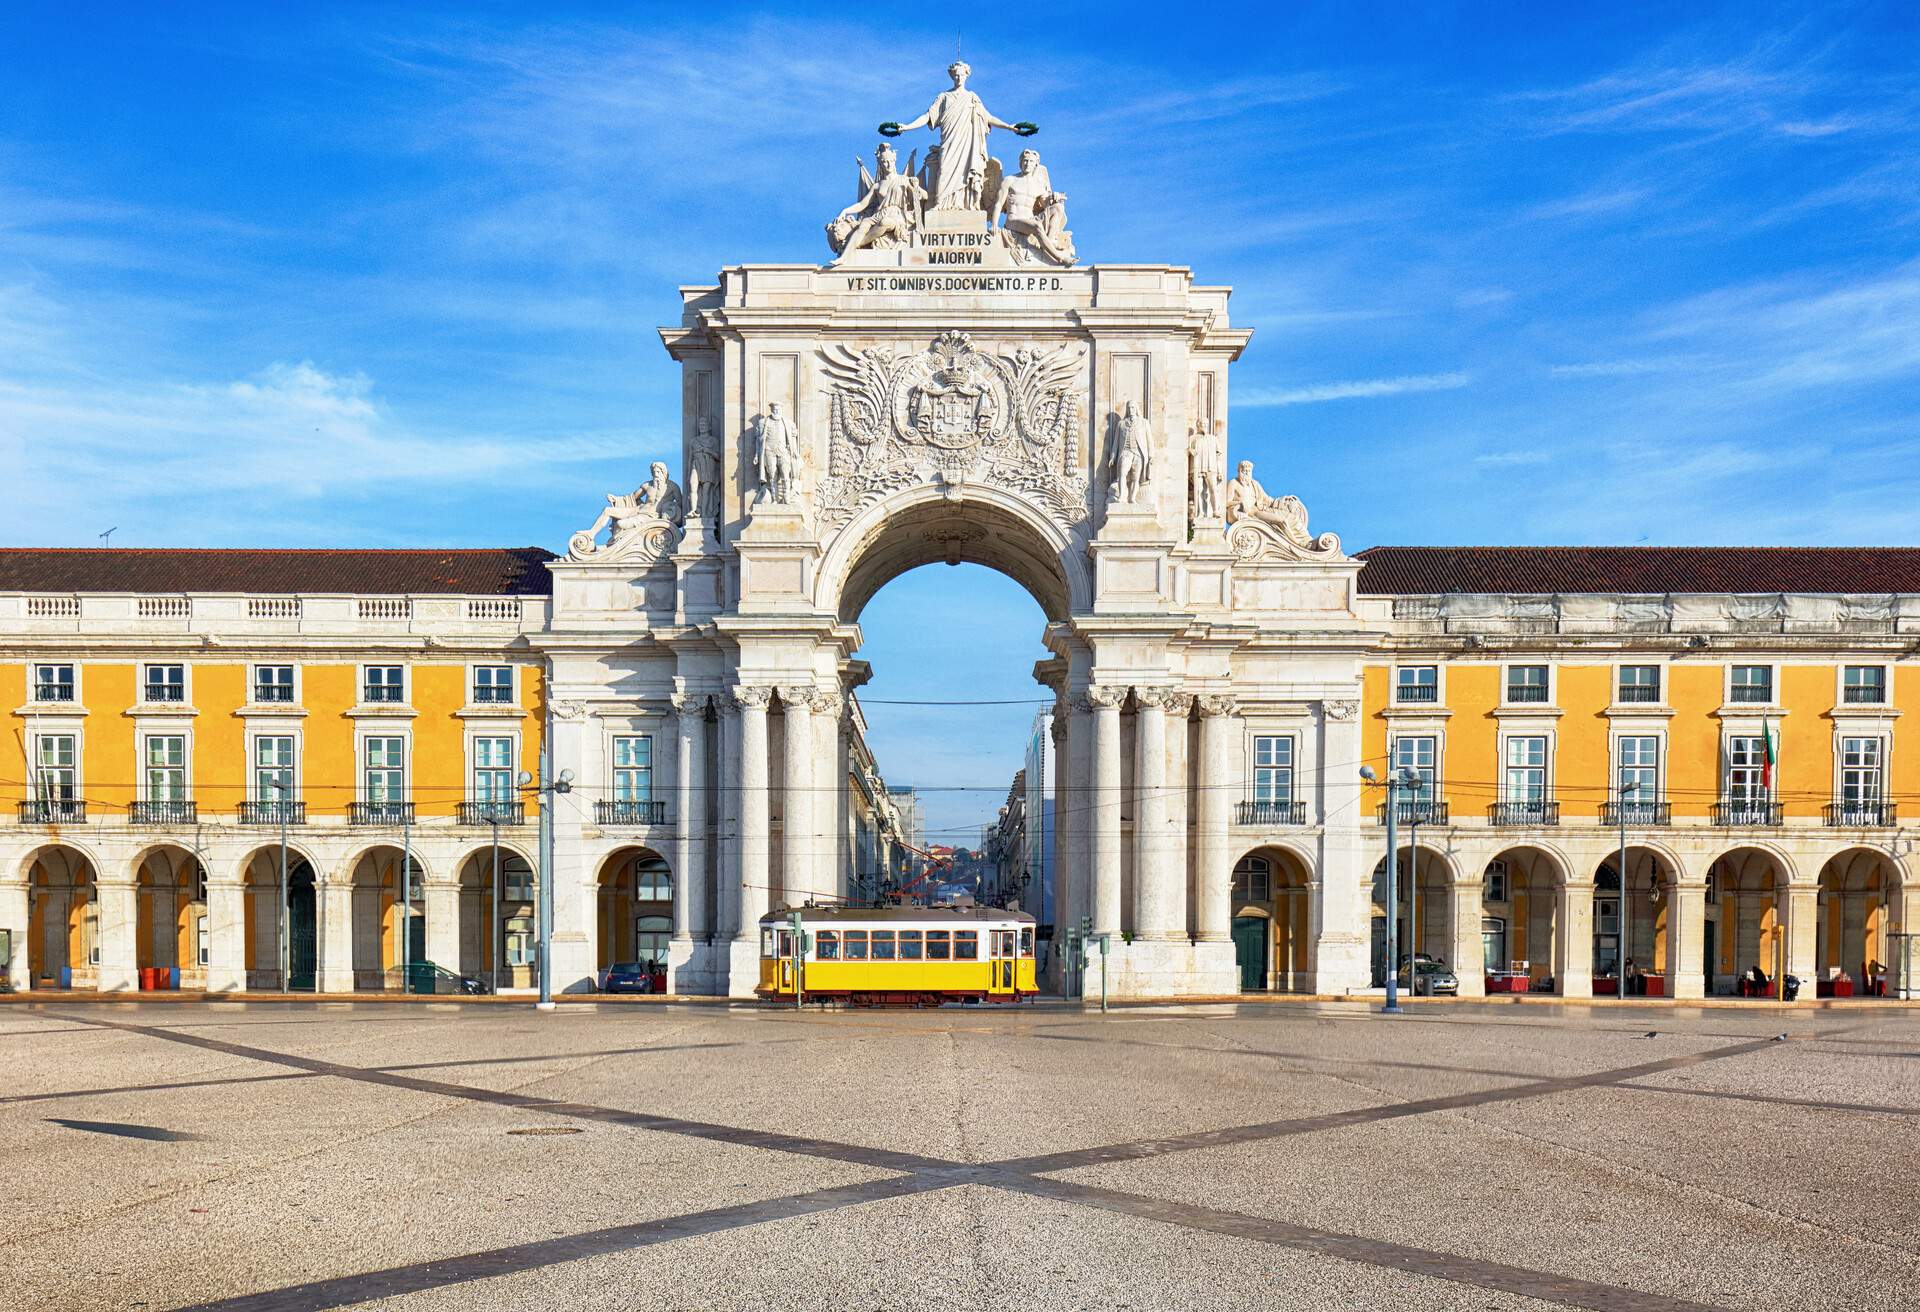 A yellow tram passed the stone memorial arch connecting the arcades supported by columns at regular intervals in a town square.